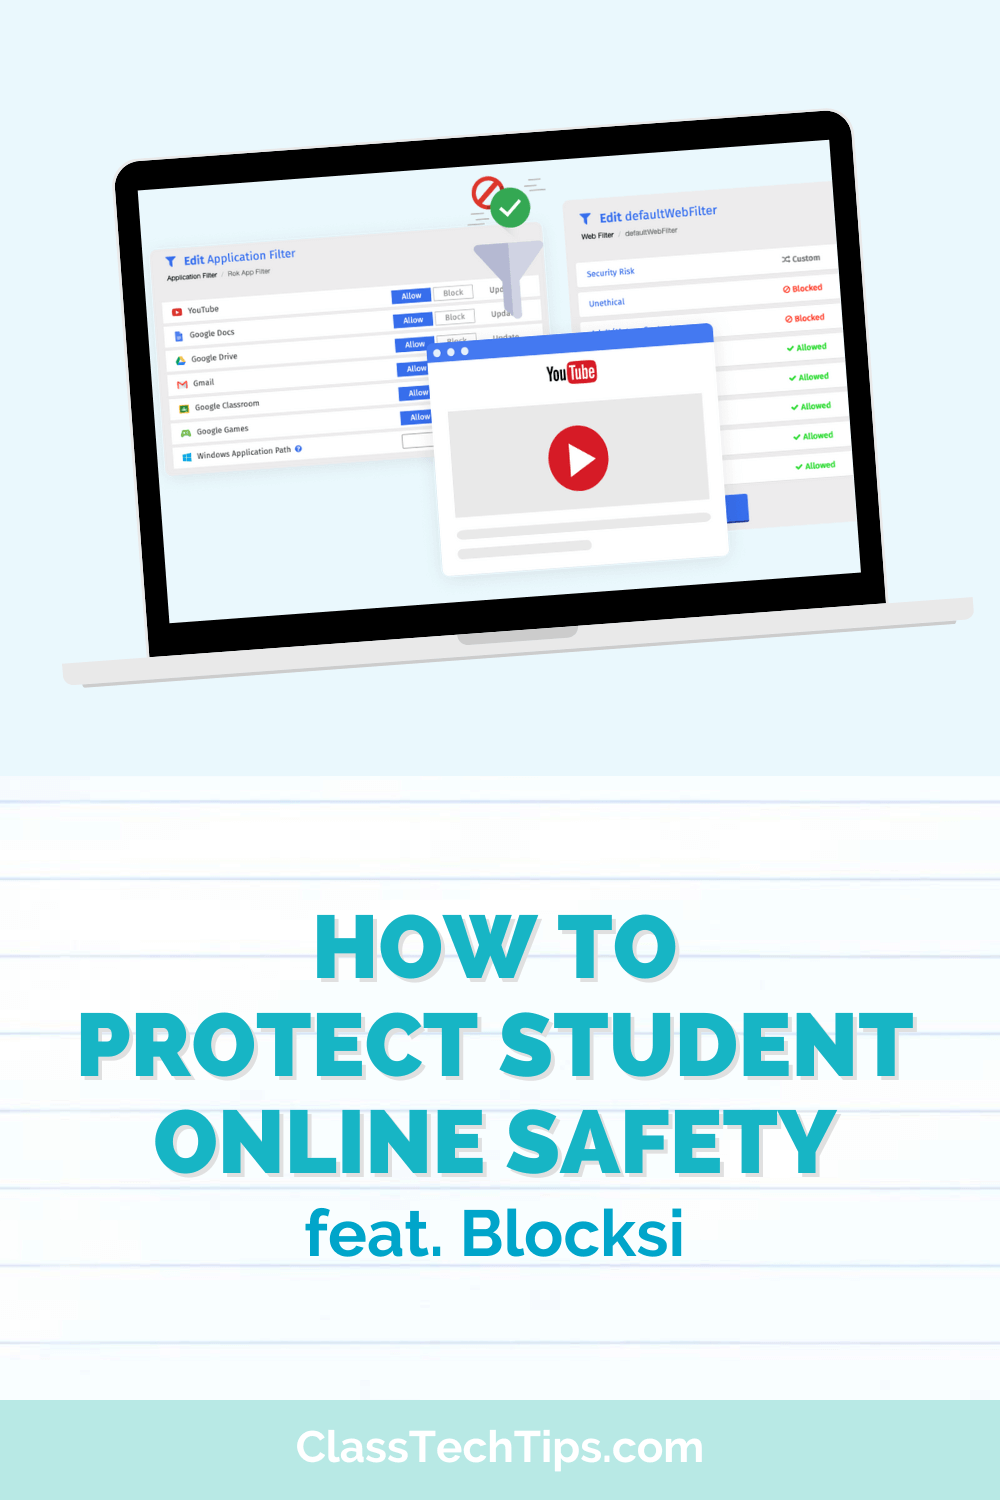 Tips and ideas for how to protect student online safety including the screenshot of Blocksi shown here.